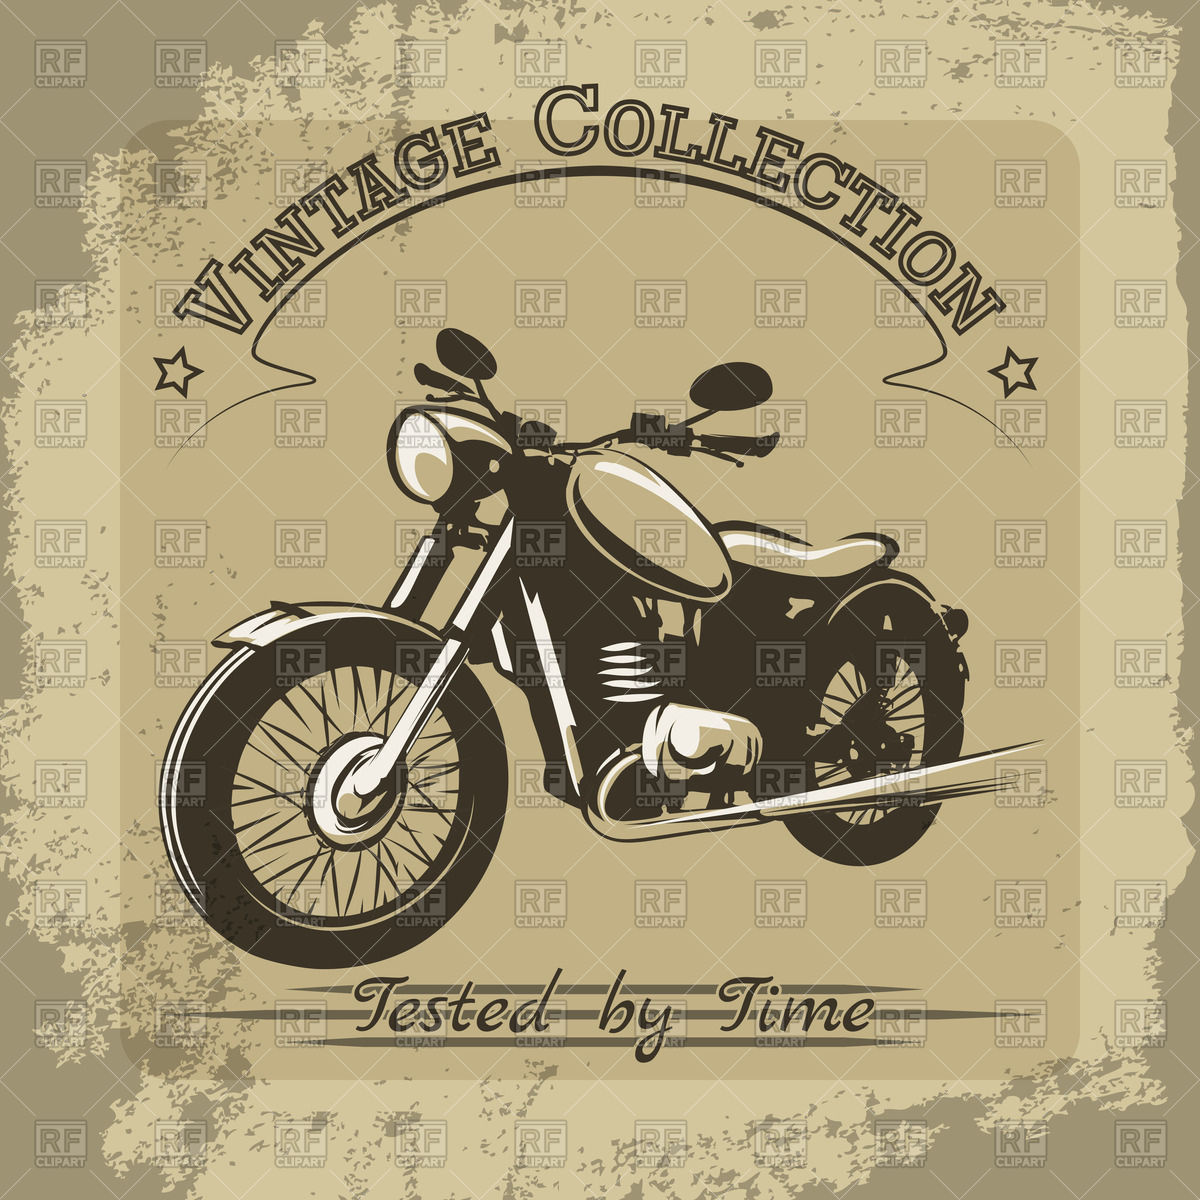 Vintage Motorcycle   Stained Retro Poster With Chopper Motorbike    